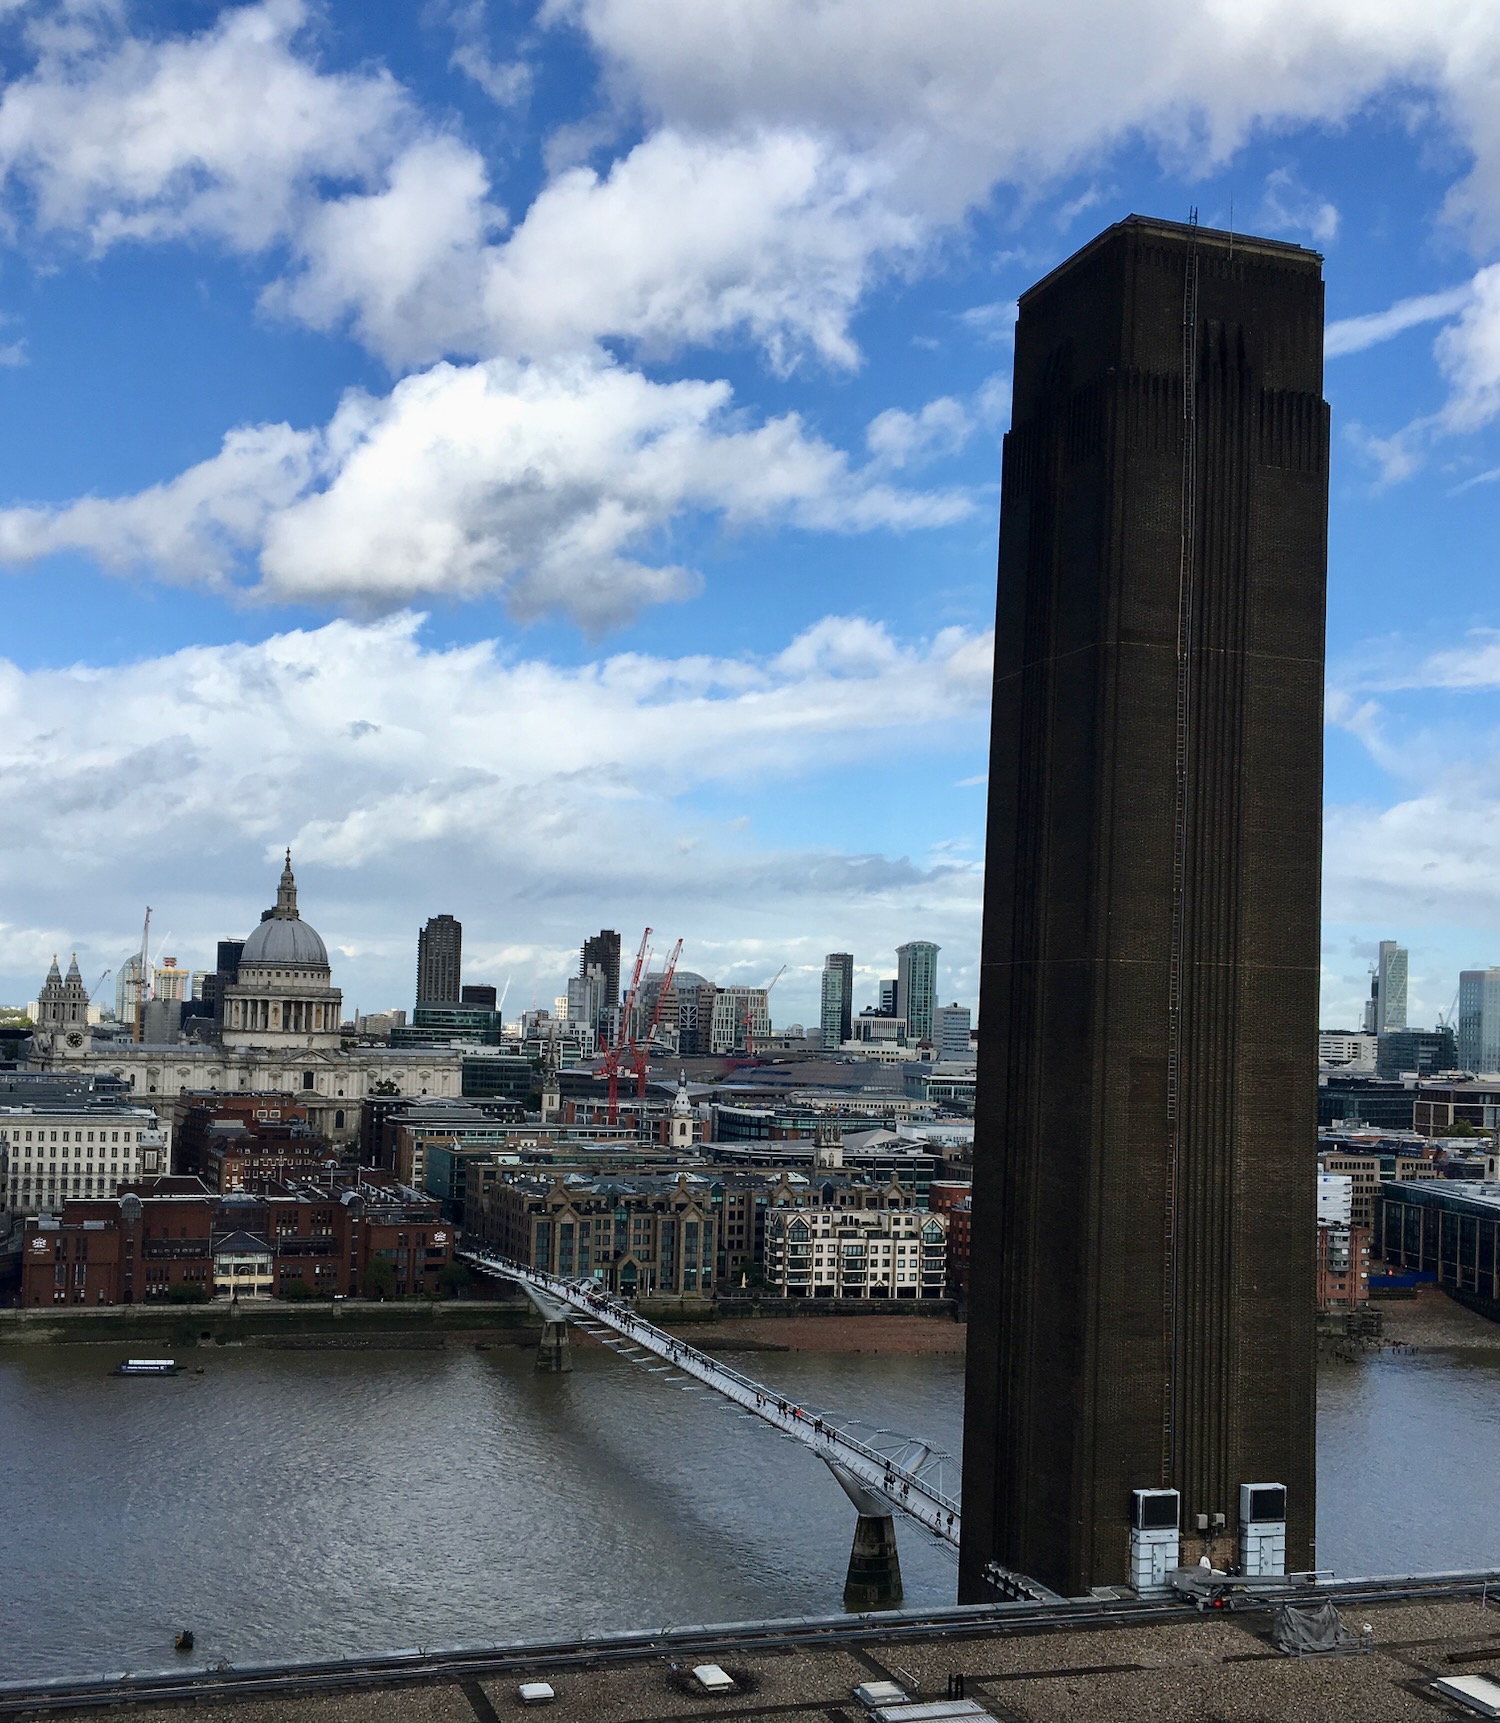 View of St Paul's Cathedral from the top floor of the Blavatnik Building at Tate Modern. Photo Credit: © Ursula Petula Barzey.